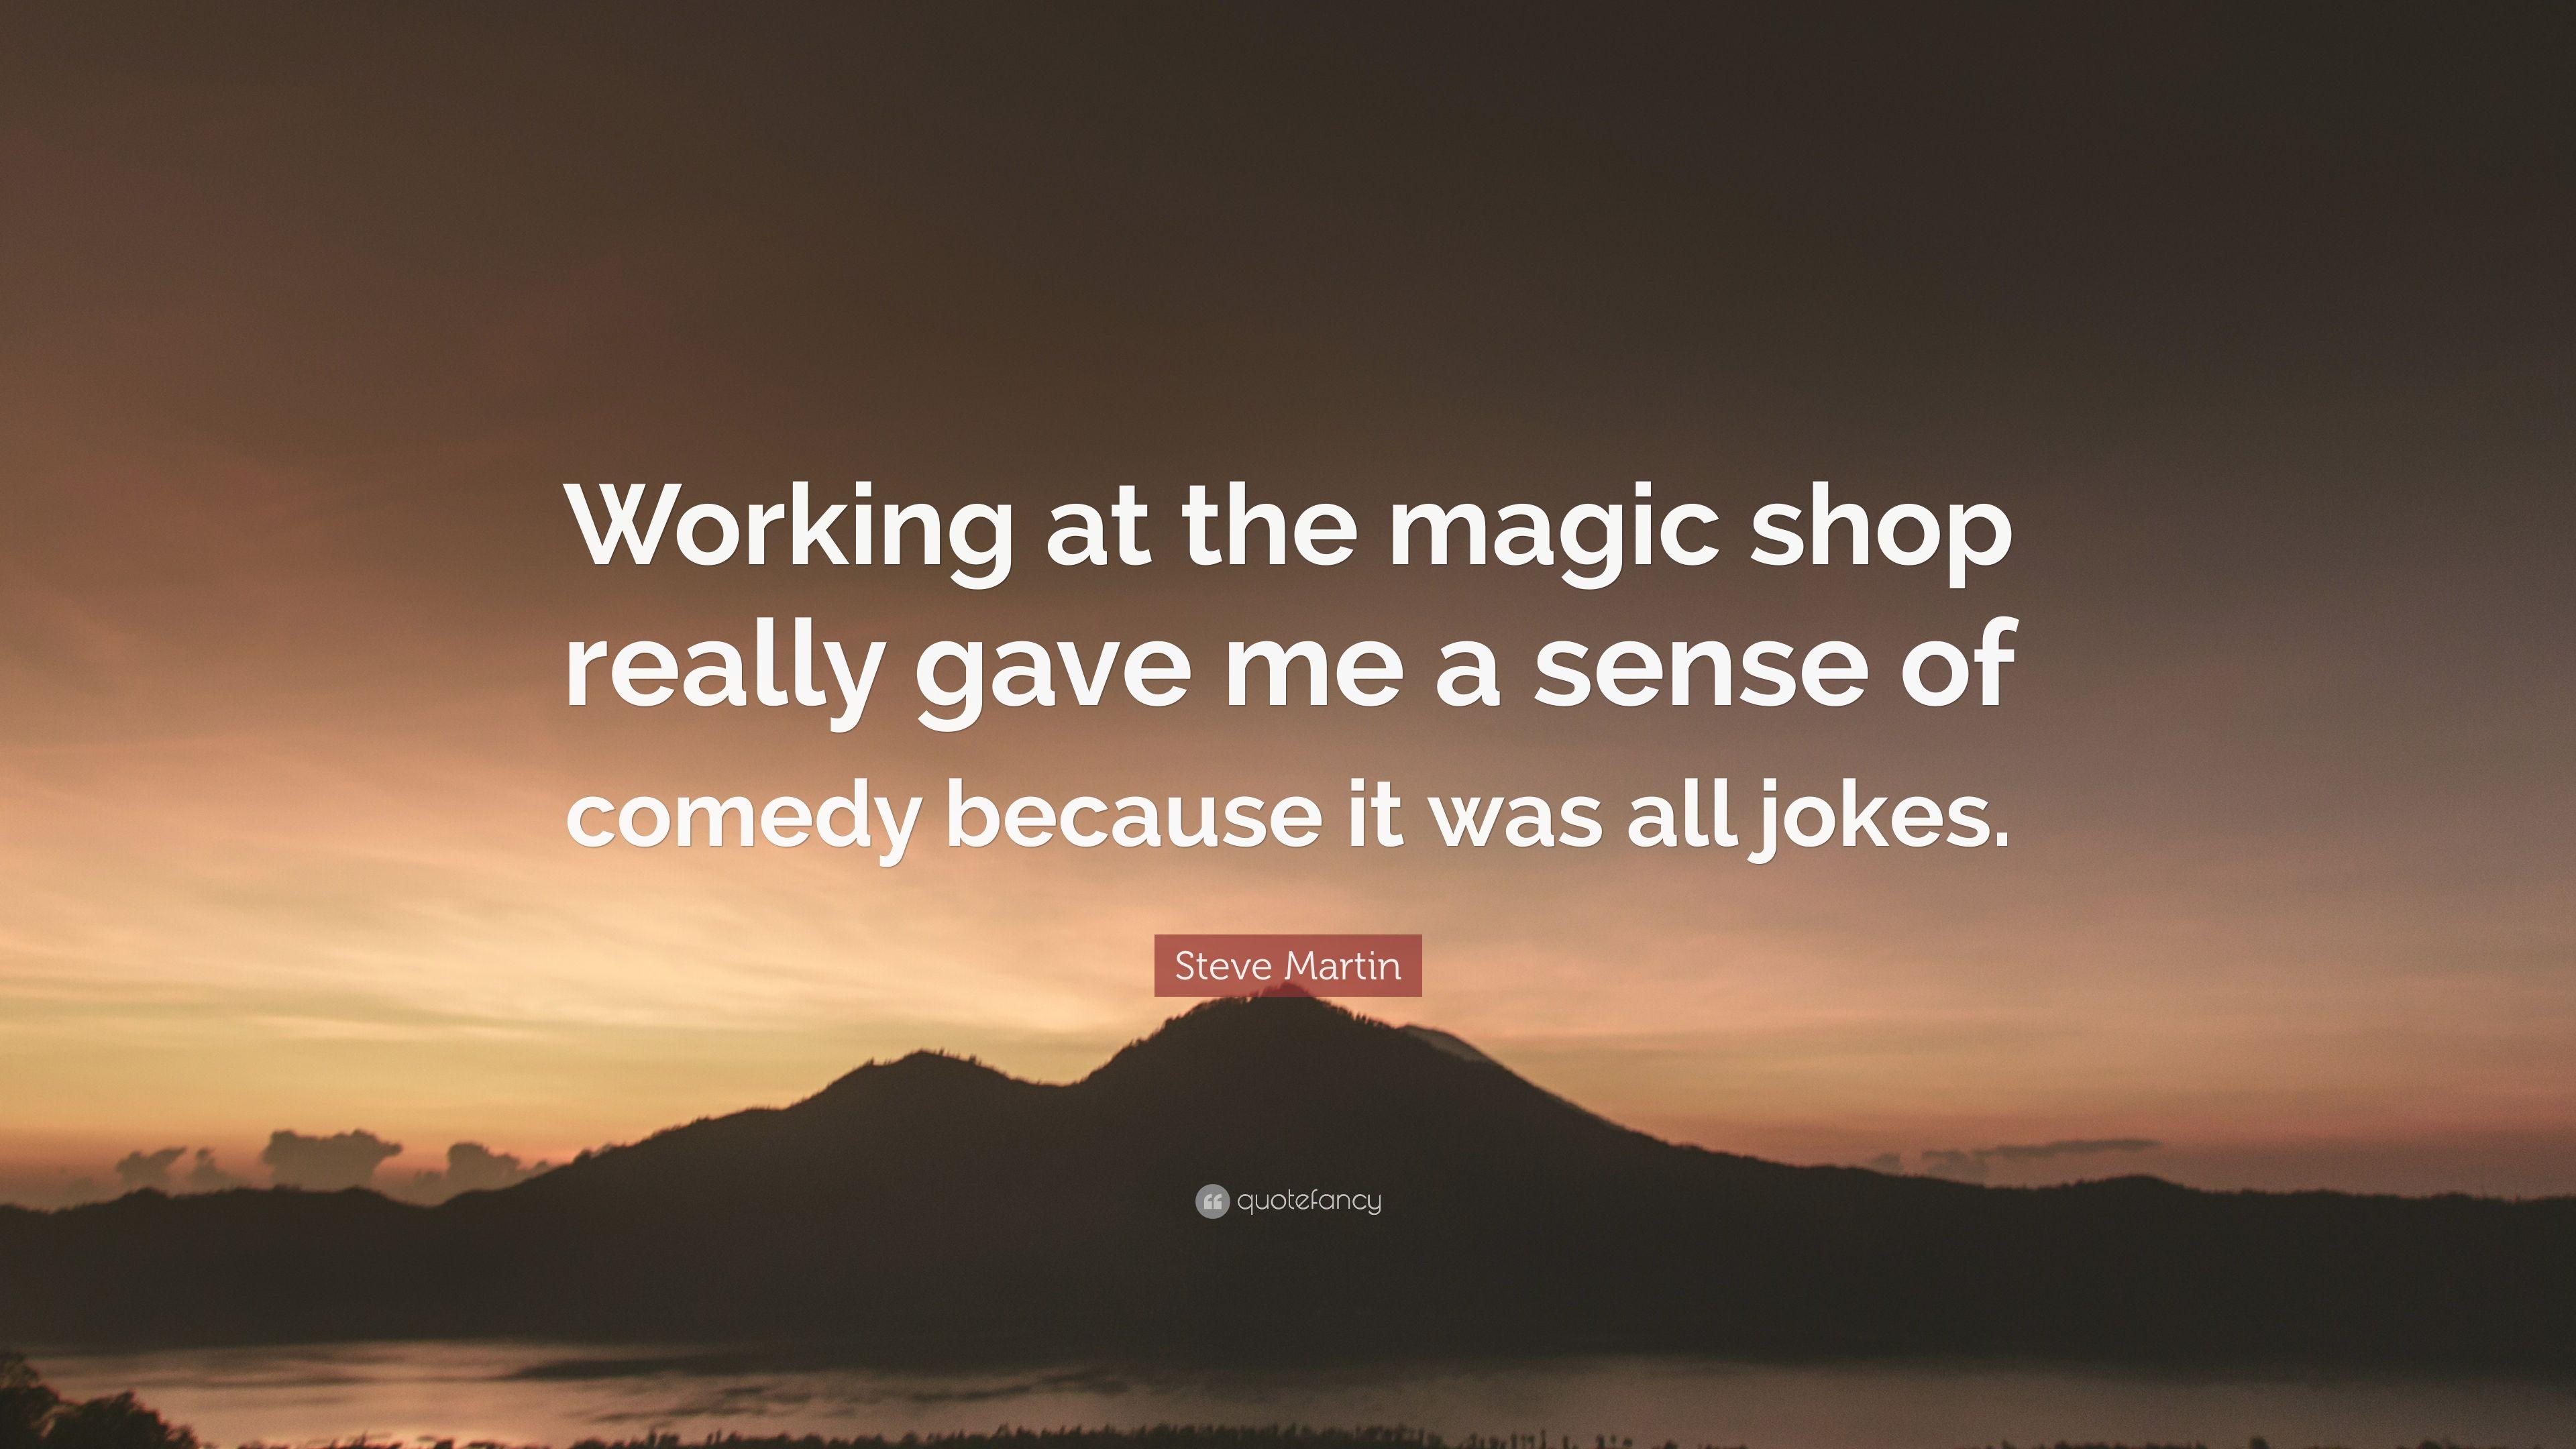 Steve Martin Quote: “Working at the magic shop really gave me a